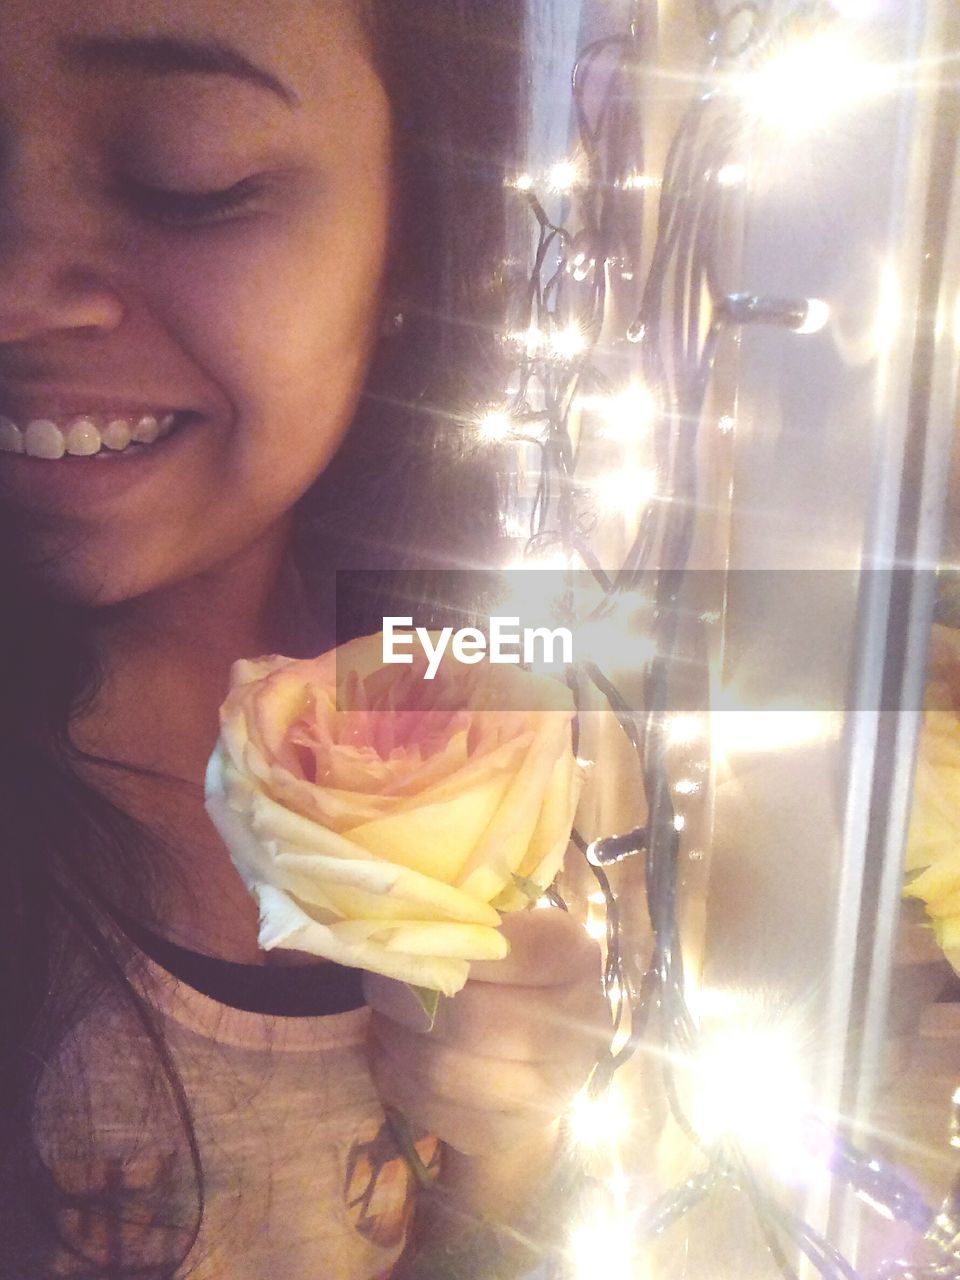 CLOSE-UP OF SMILING WOMAN WITH ILLUMINATED FLOWER IN BACKGROUND